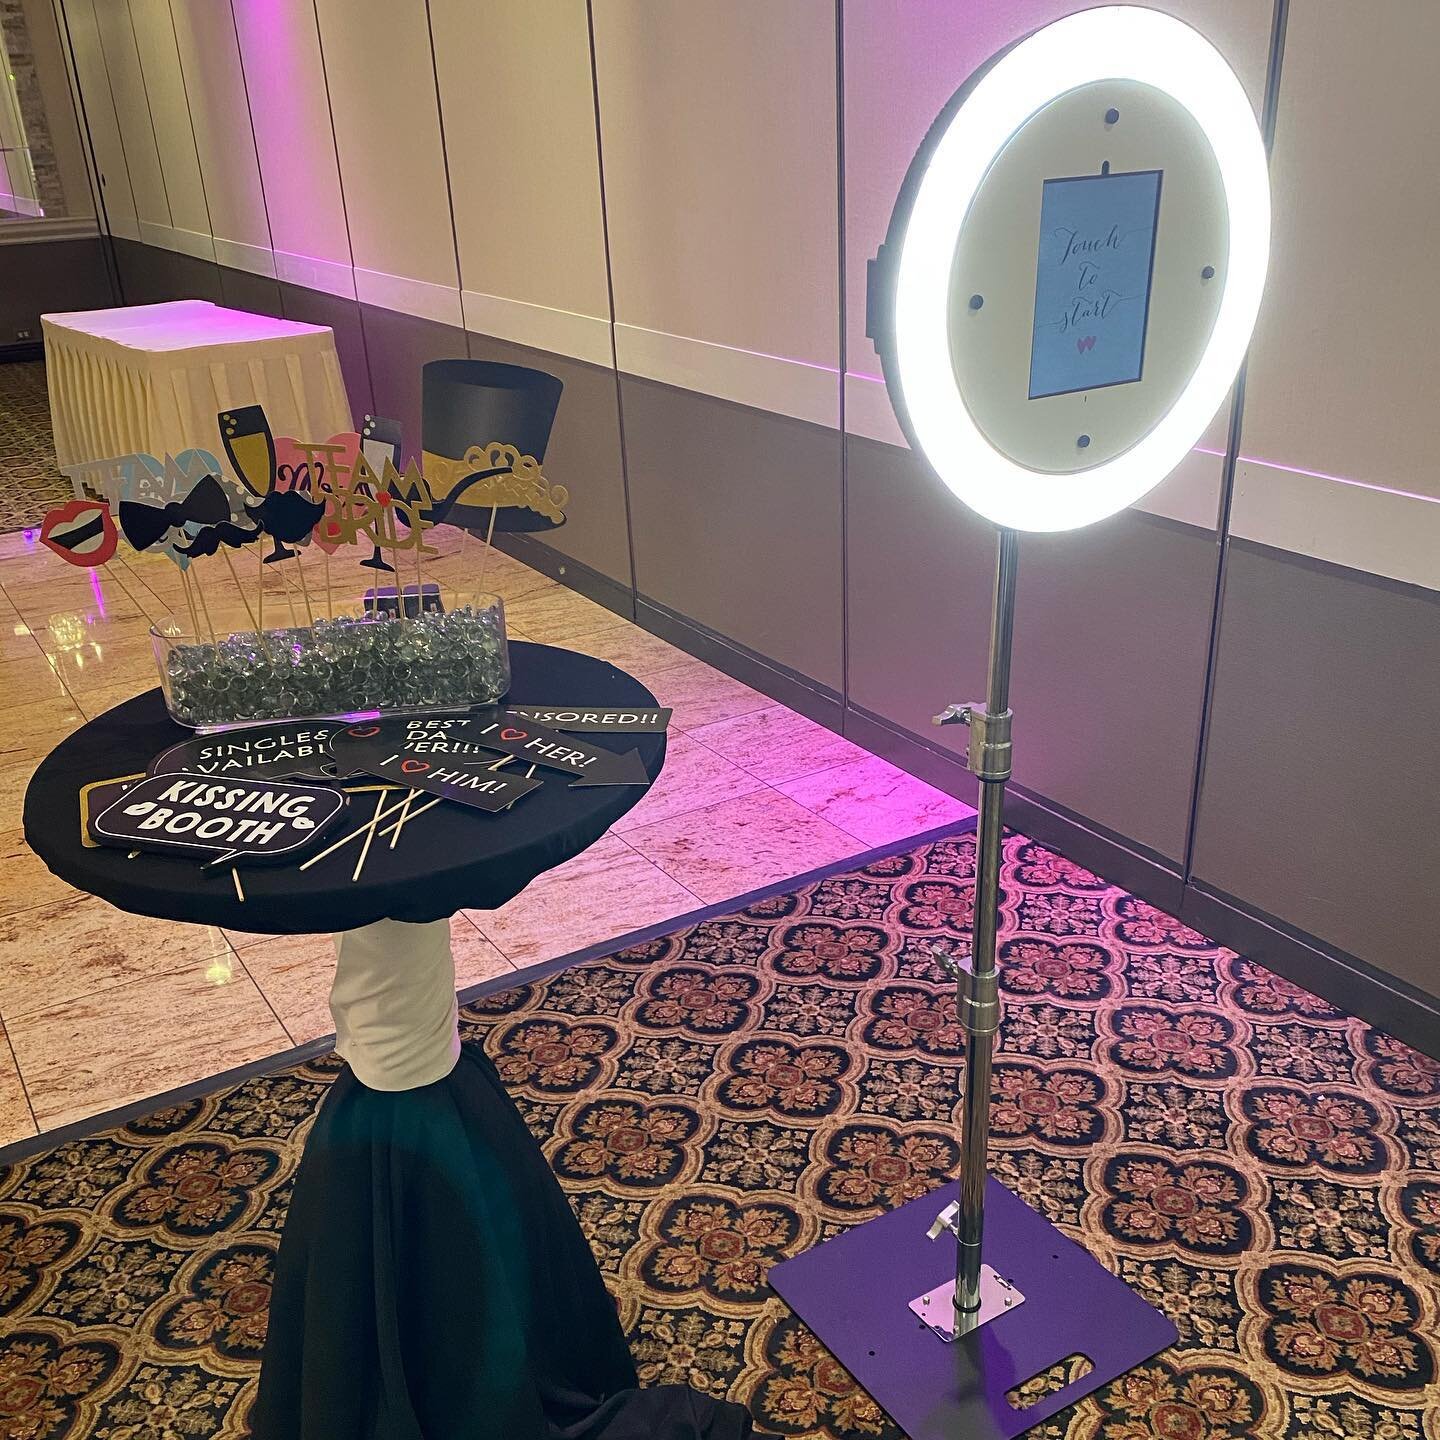 Our photobooth is the perfect addition to ANY celebration! Happy Wedding Day to the Kloch&rsquo;s! 
.
.
@manzosbanquets 
#LetsCelebrate #WeddingIdeas #photoboothrental #SelfieBooth #chicagoweddings